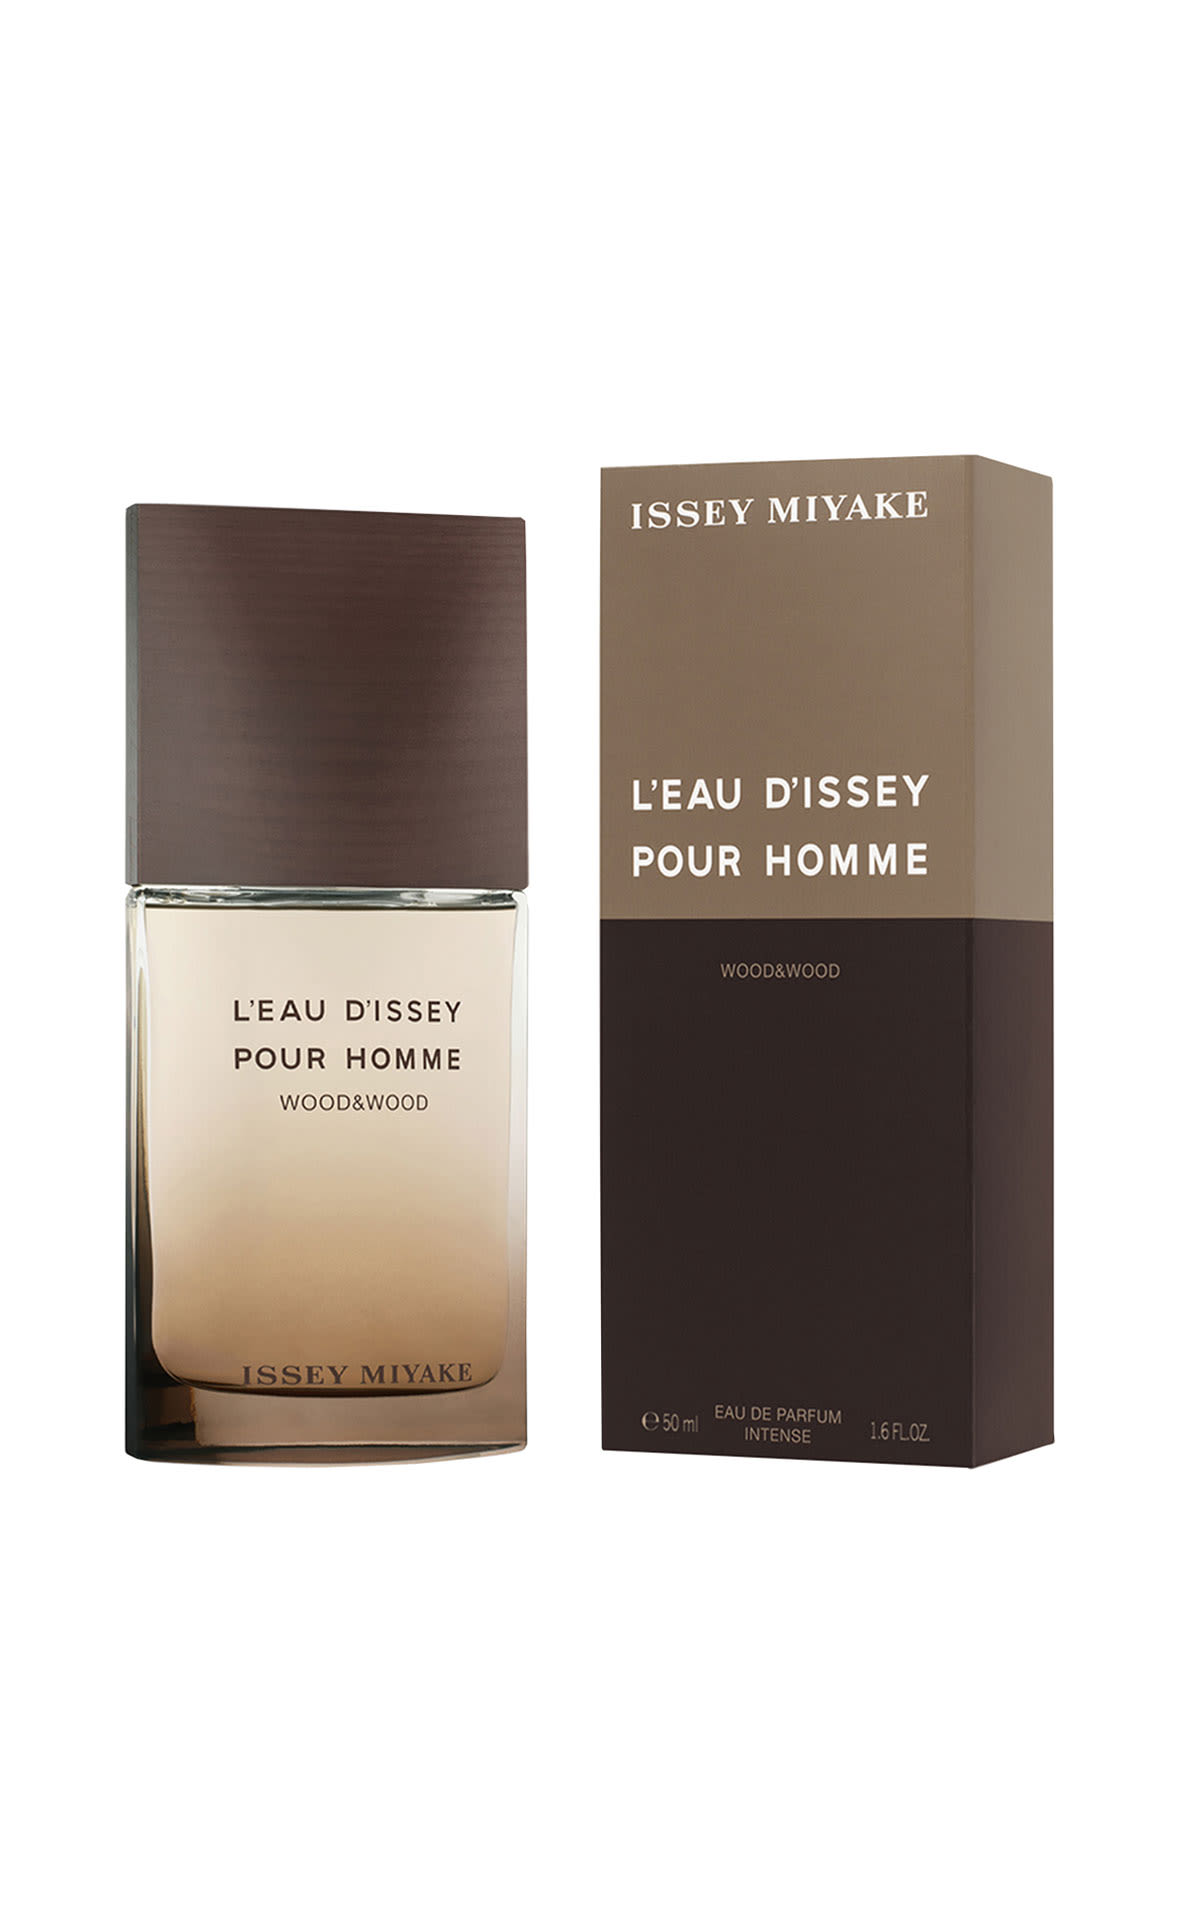 Beaute Prestige International Issey Miyake L'Eau d'Issey pour homme wood & wood EDP 50ml from Bicester Village